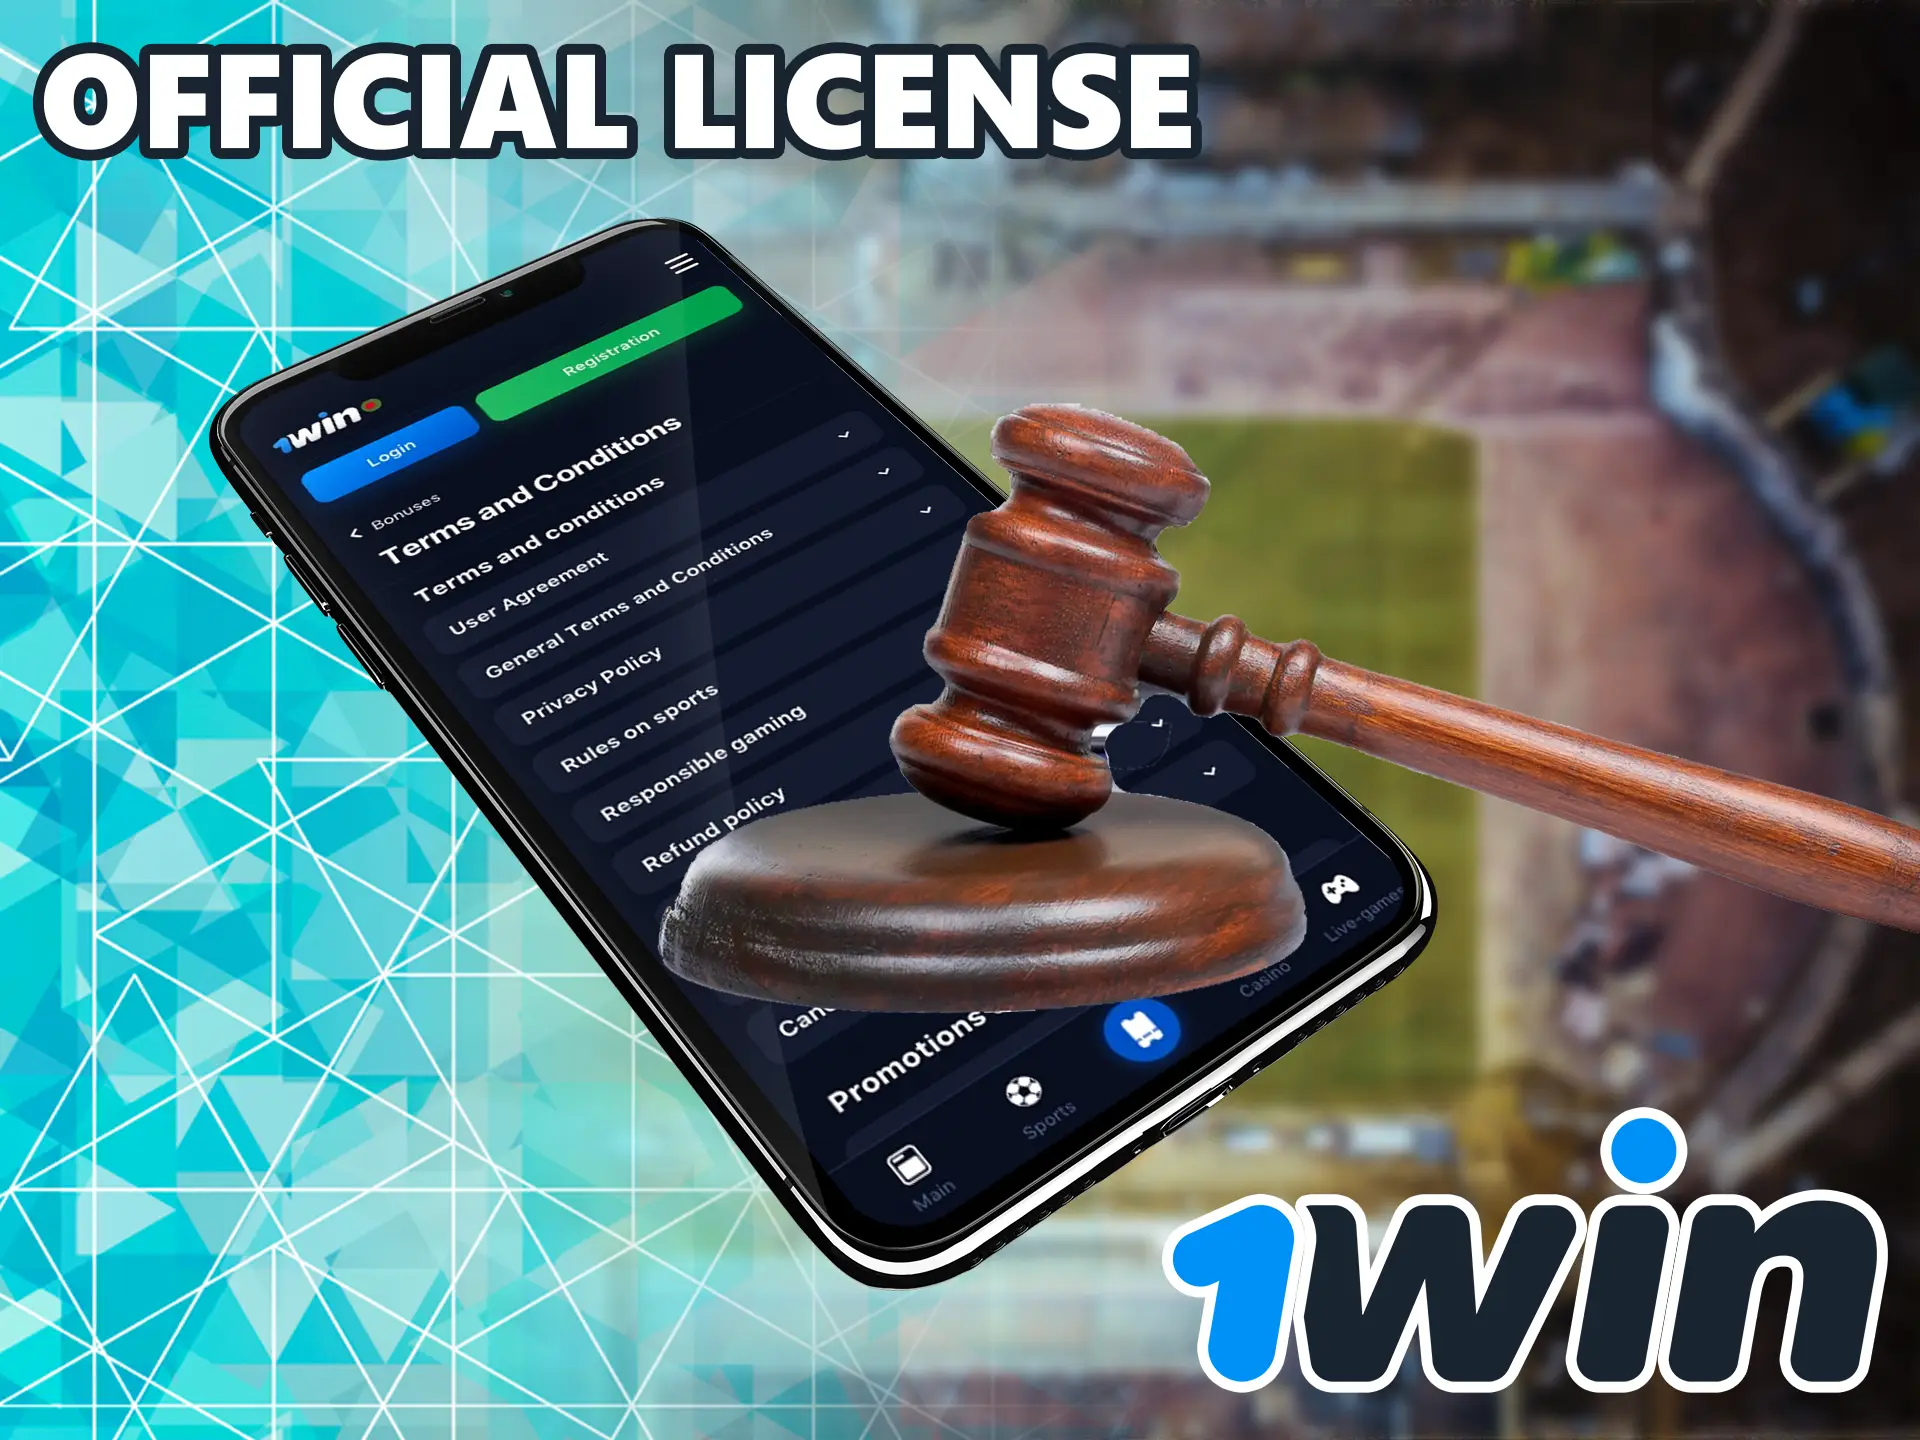 1Win is fully legal in Bangladesh and other countries, this is confirmed by the license which was obtained by the bookmaker.